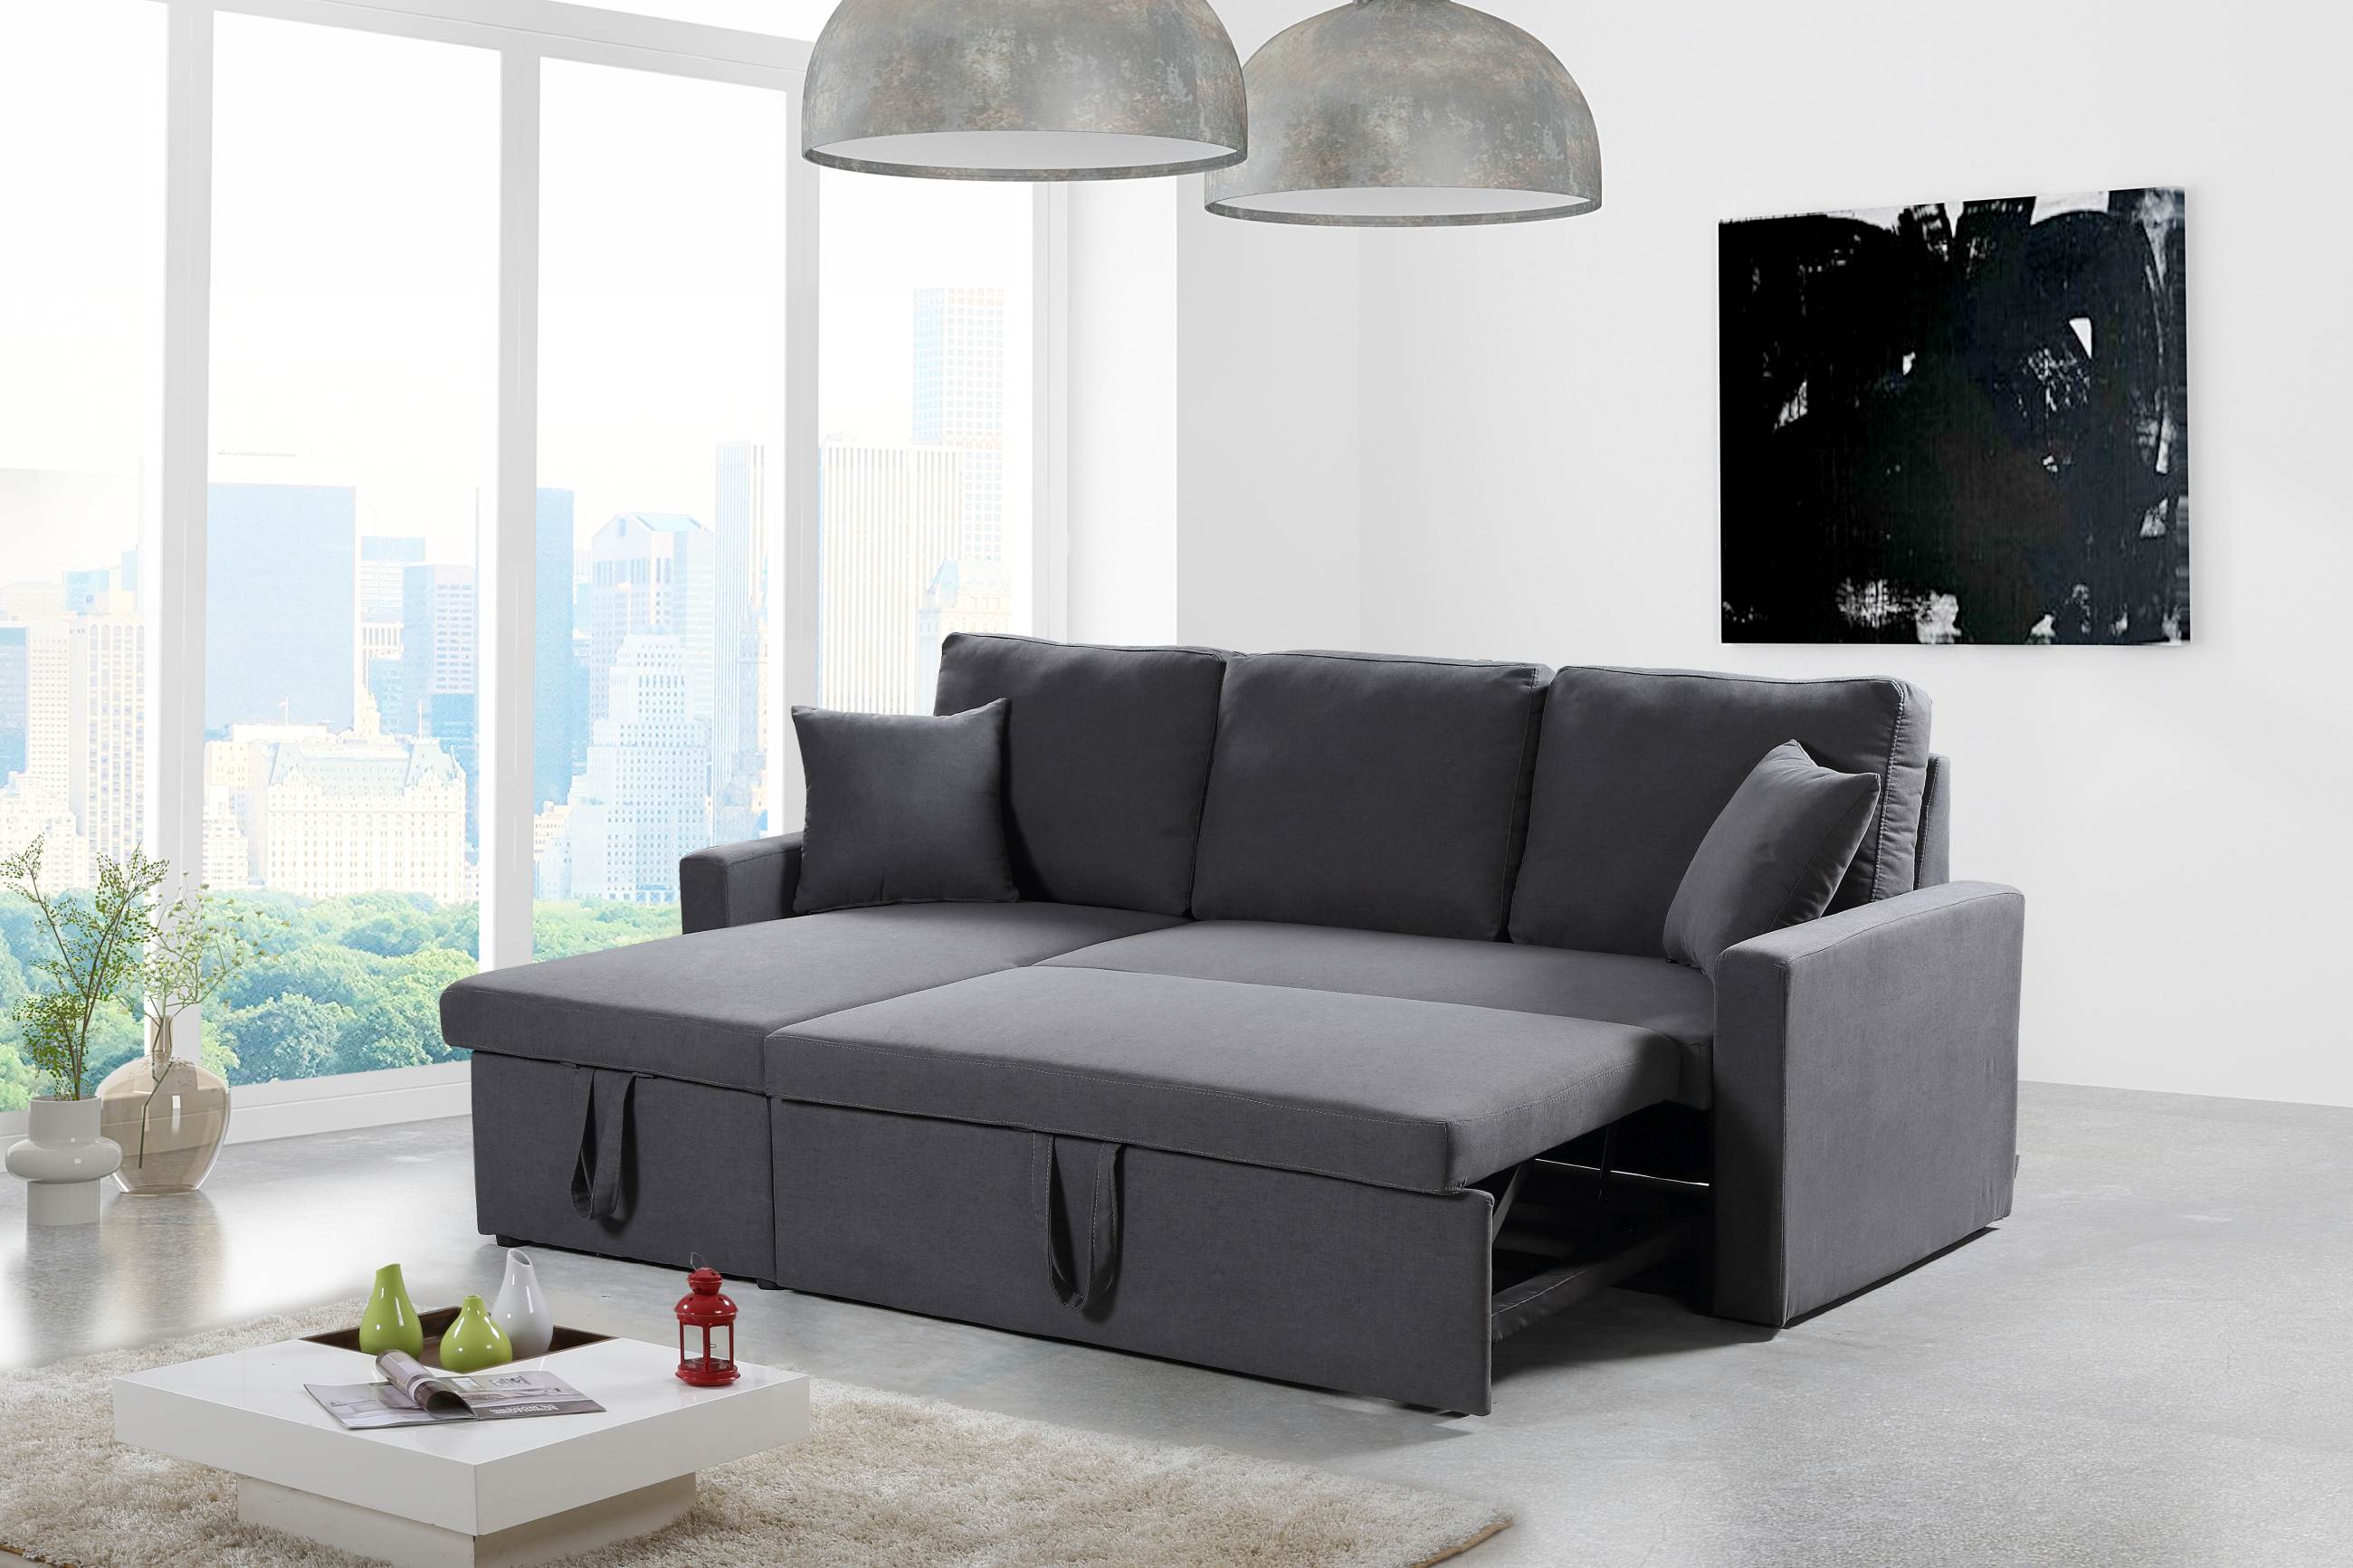 Leather Corner Sofa - Shopping And Purchasing Guide